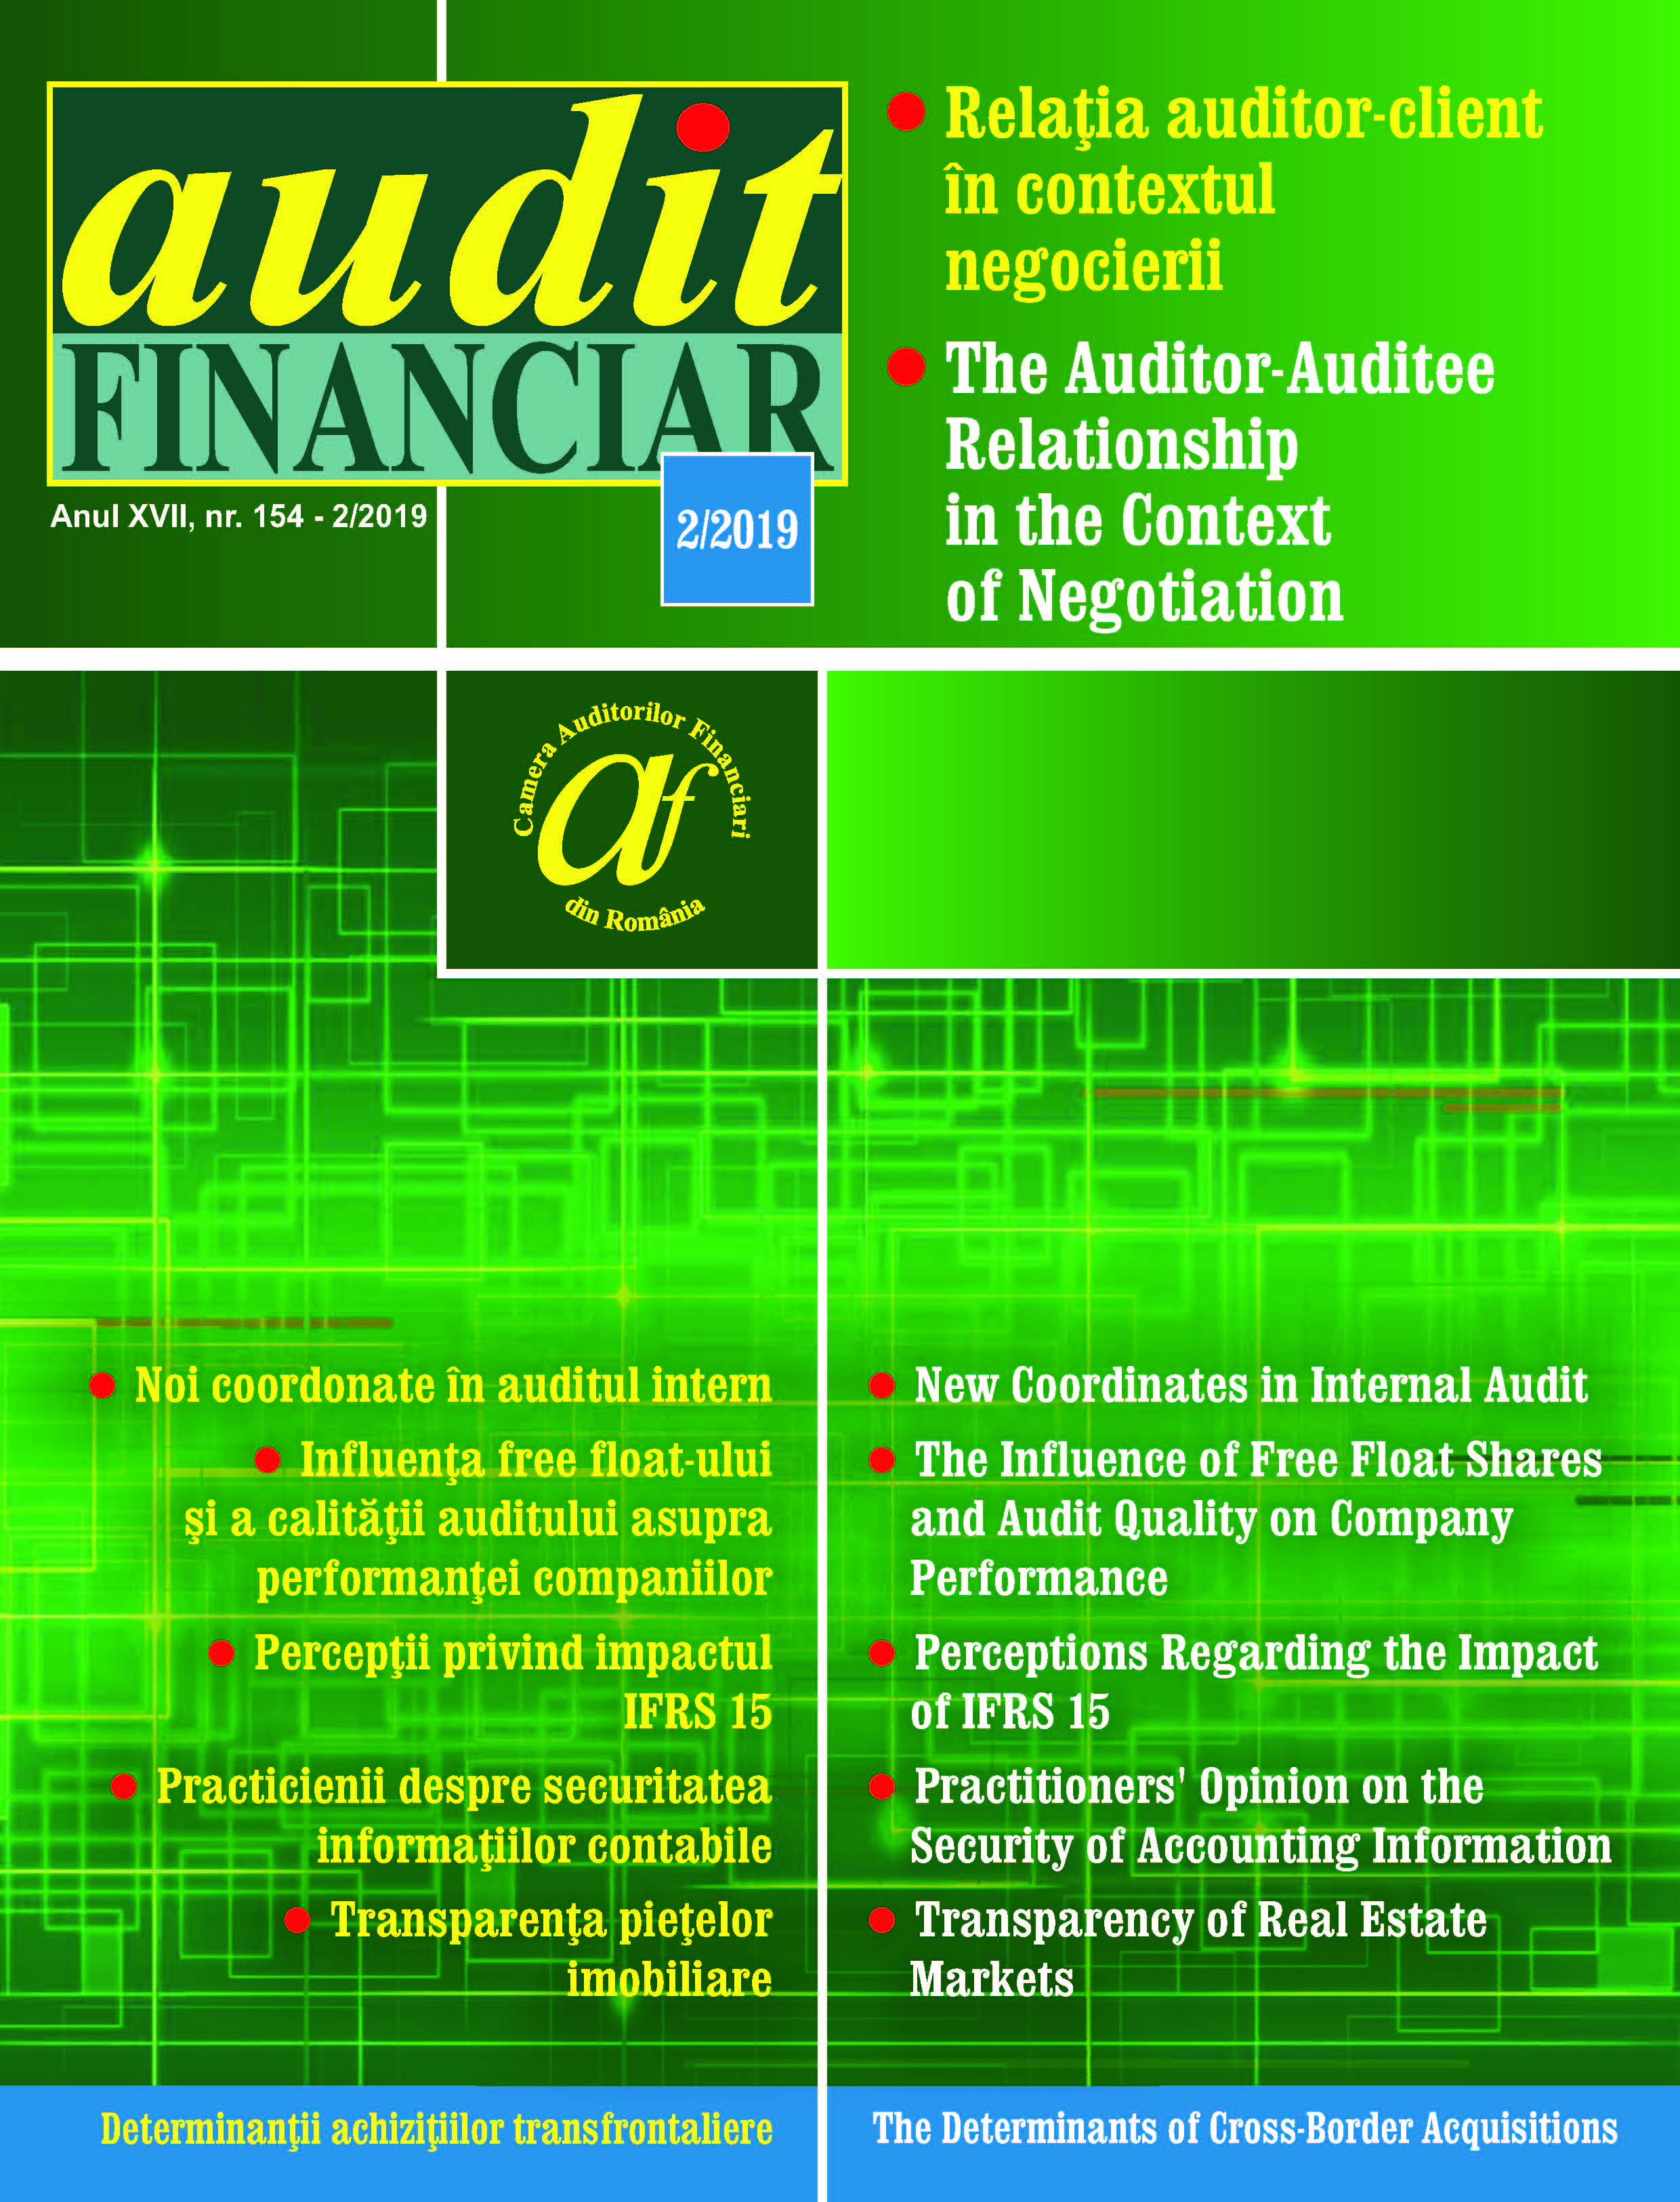 Aspects Regarding the Auditor-Auditee Relationship in the Context of Negotiation Cover Image